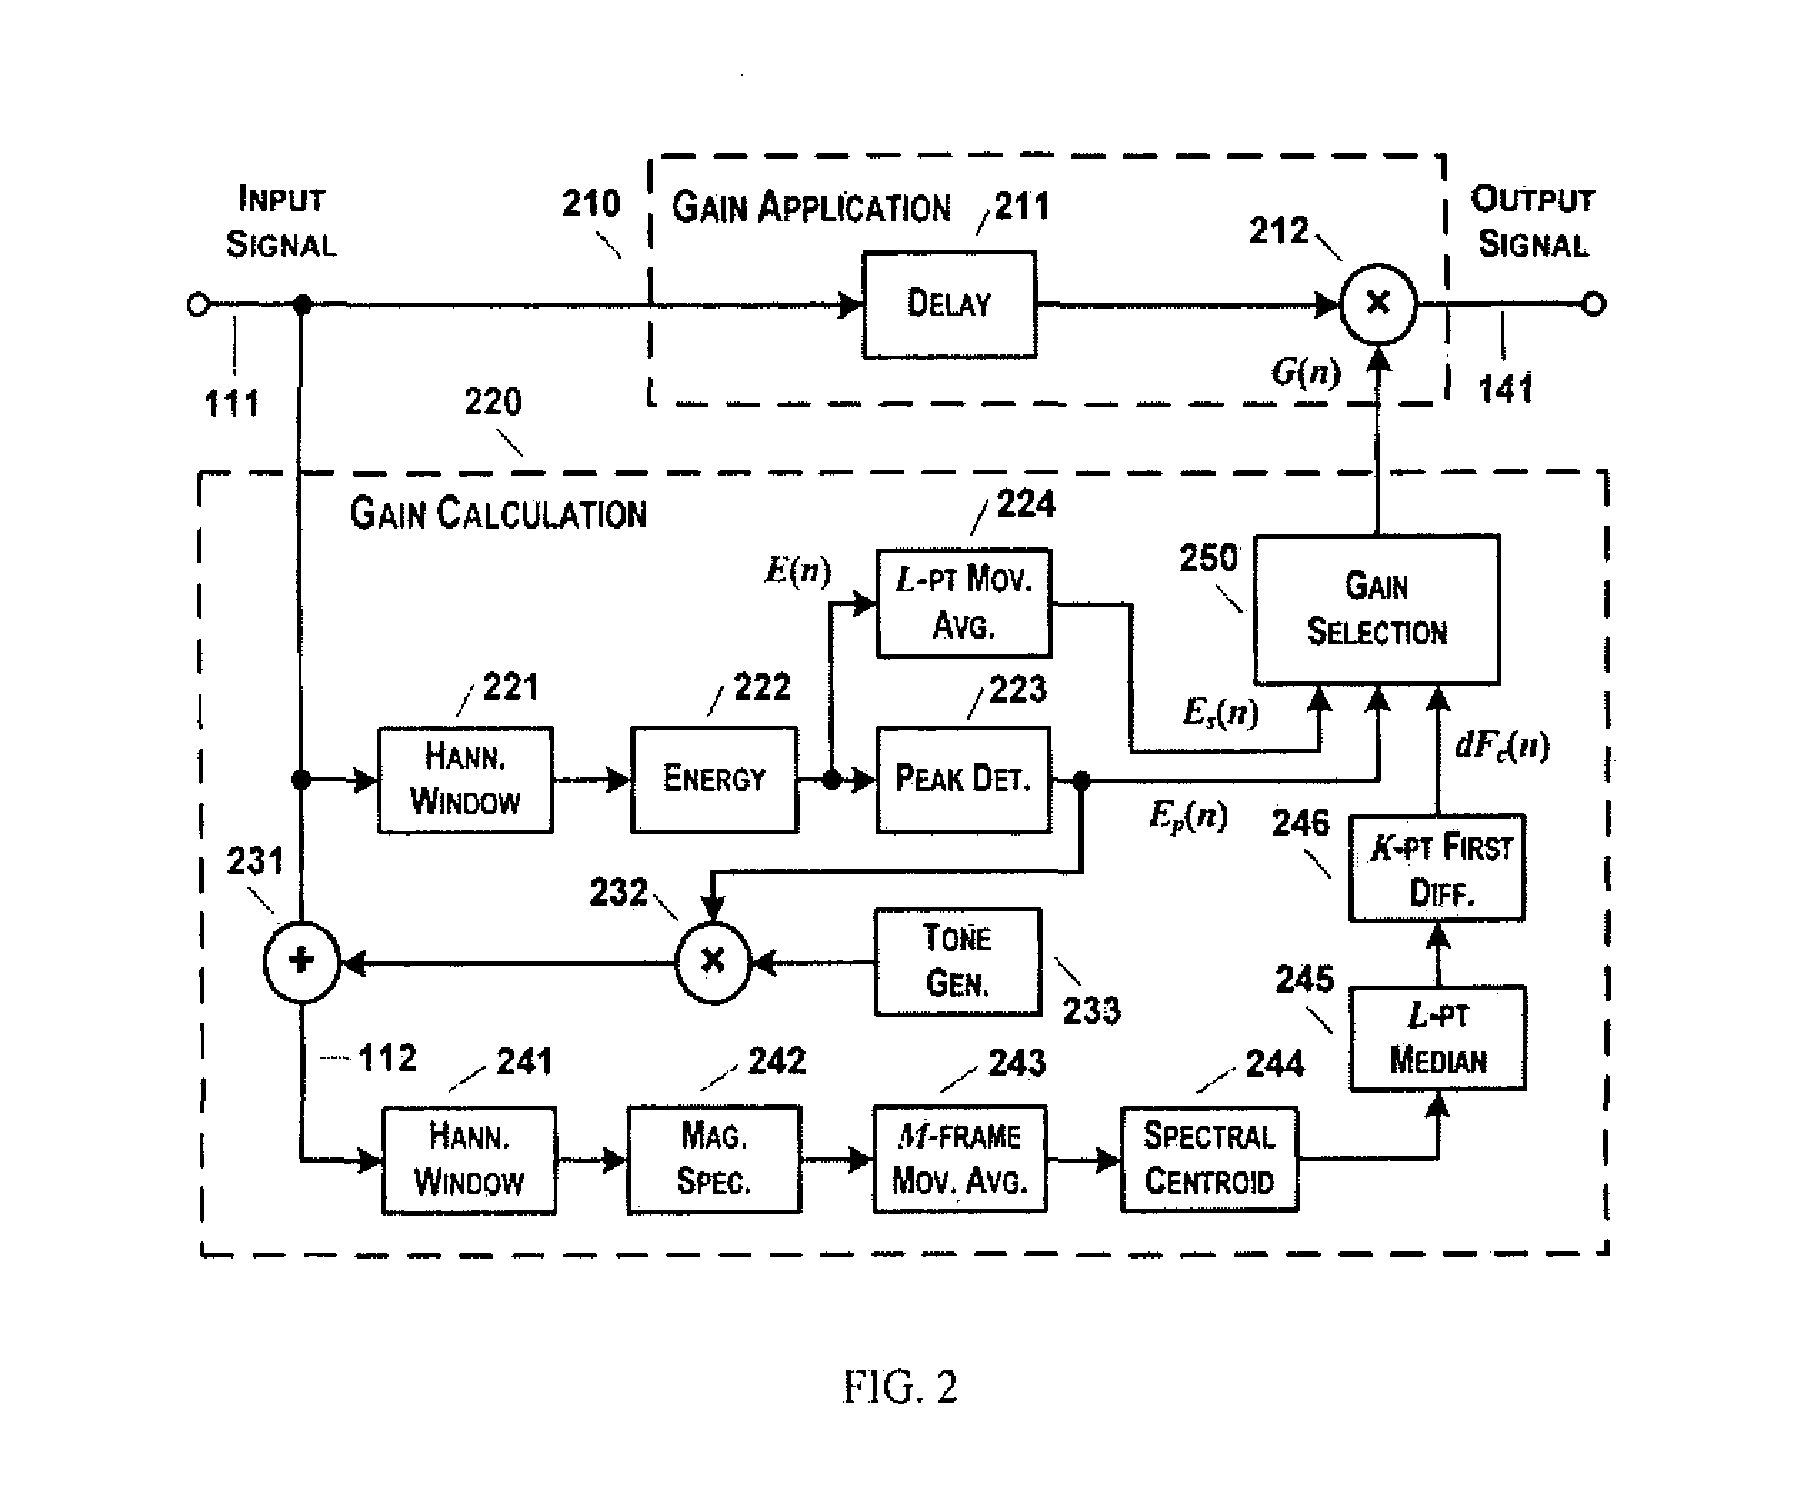 Method and system for consonant-vowel ratio modification for improving speech perception